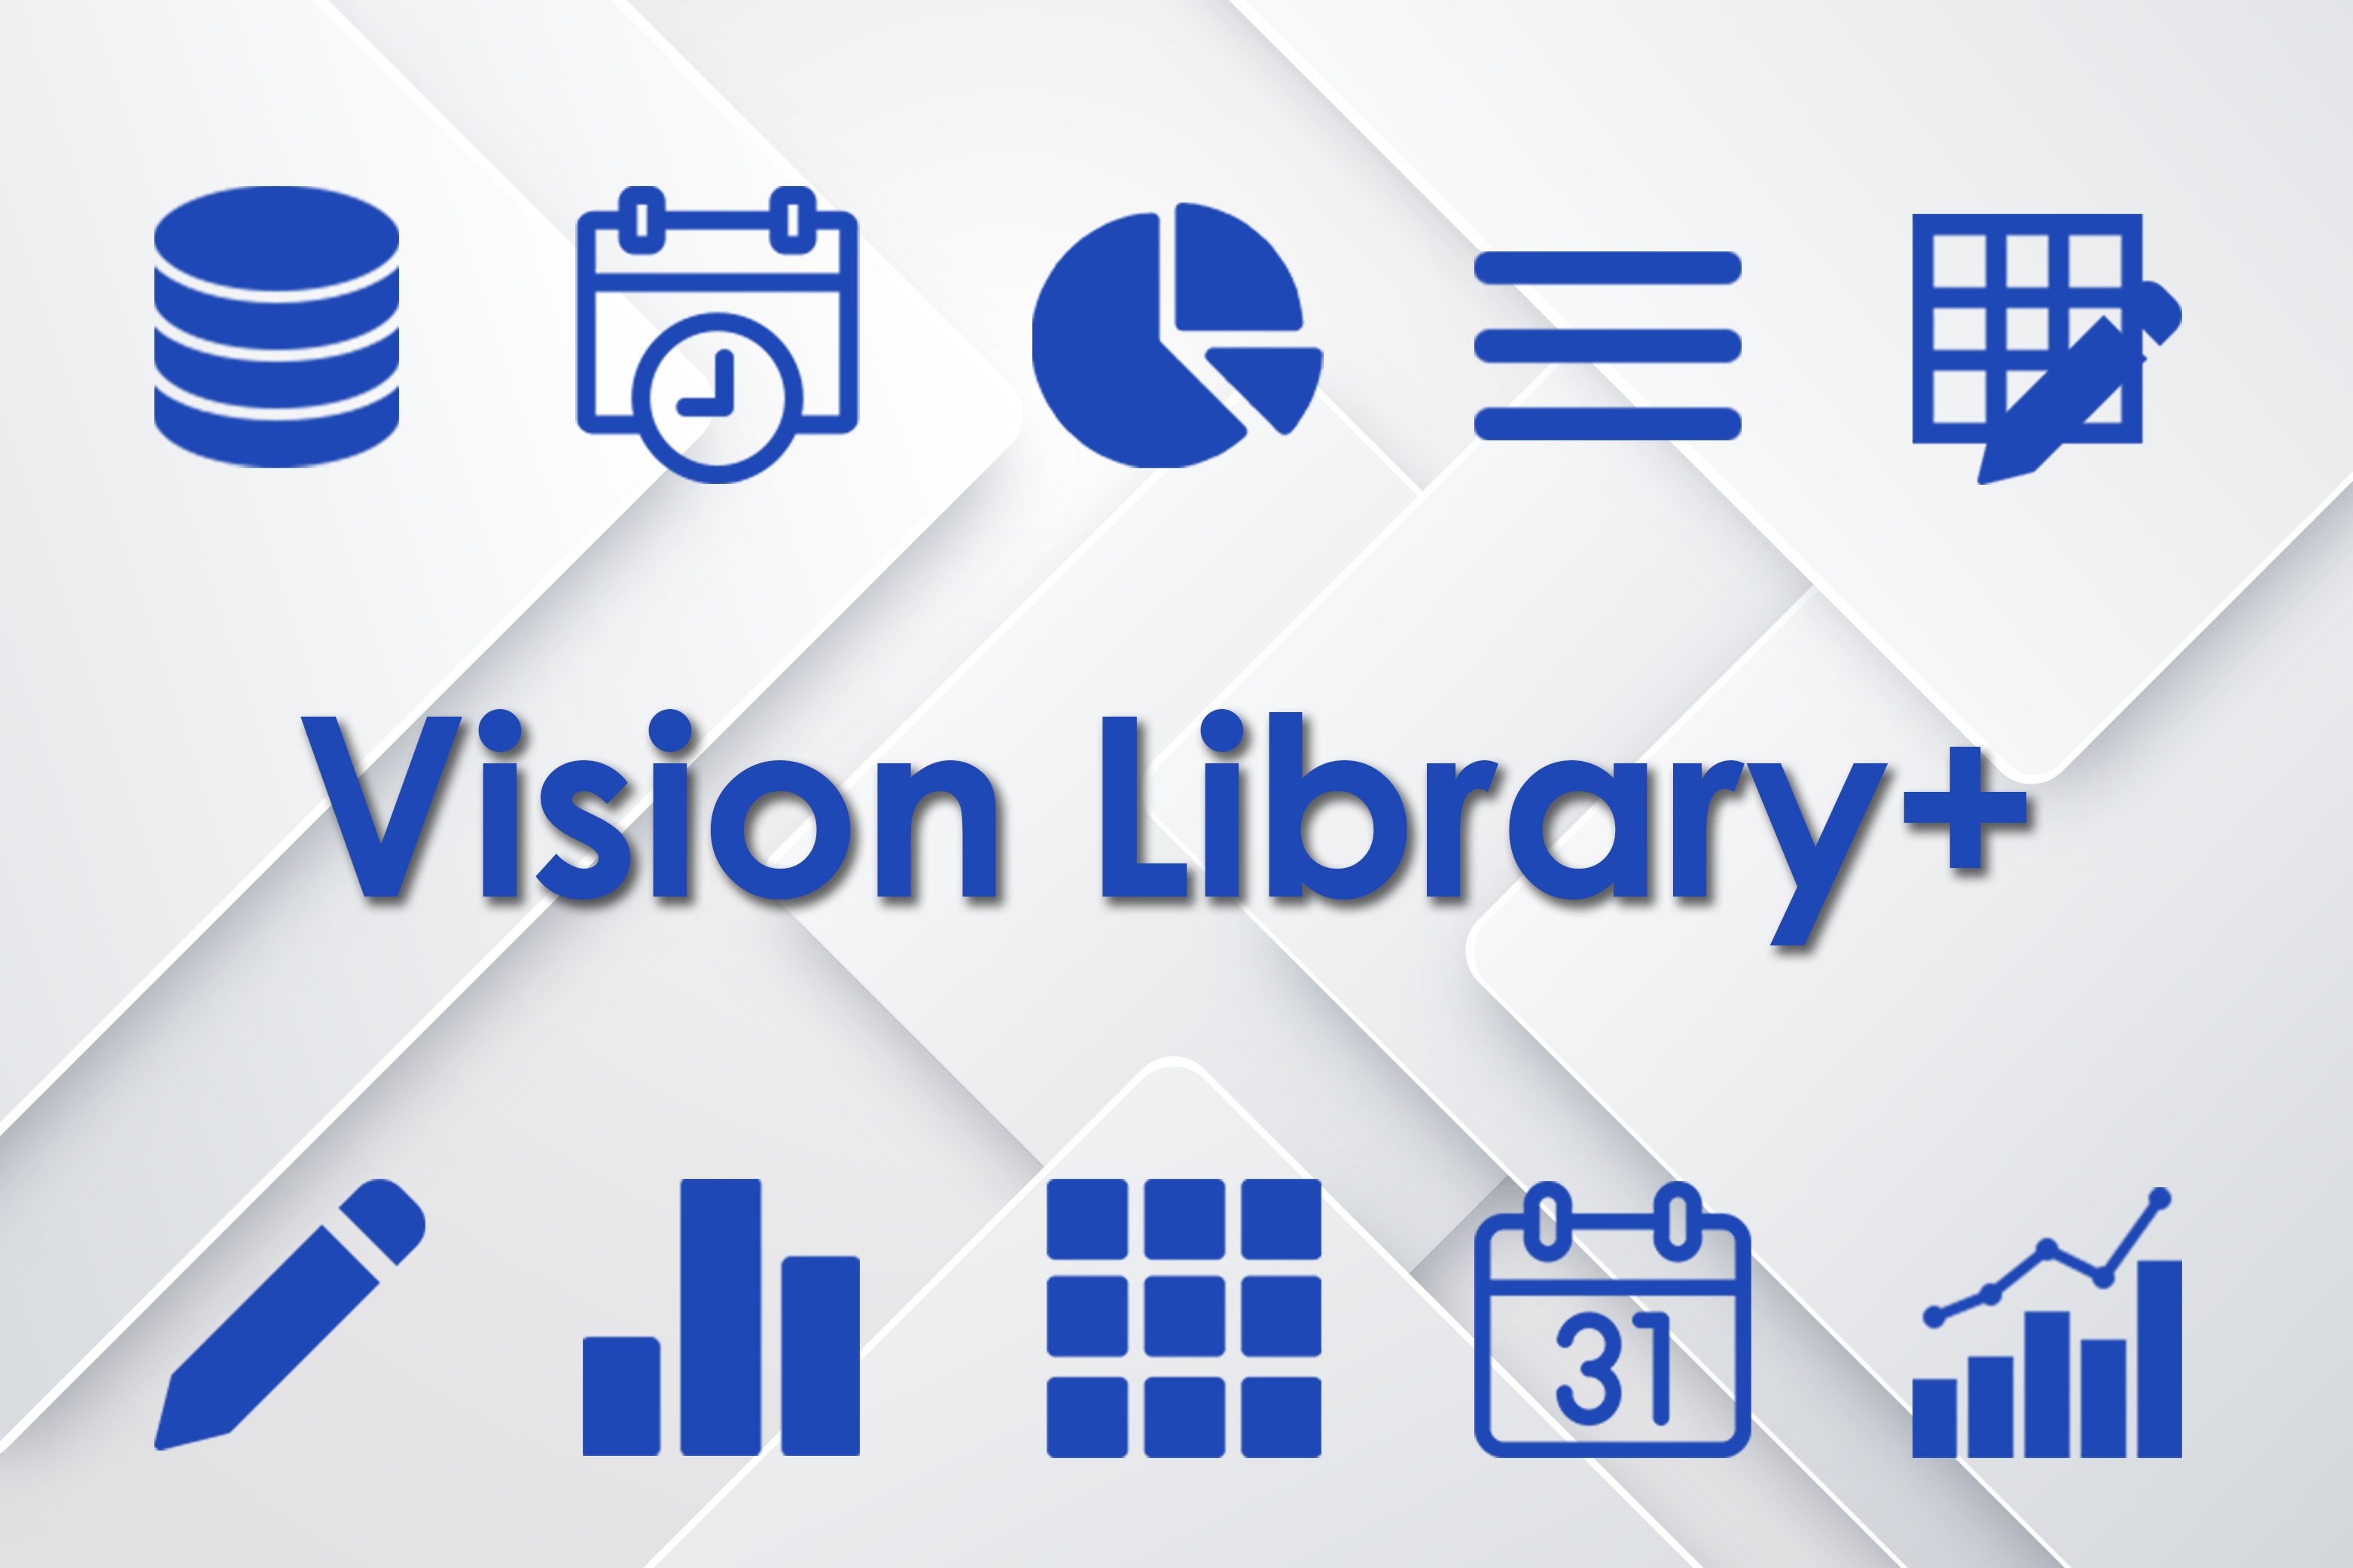 Vision Library+